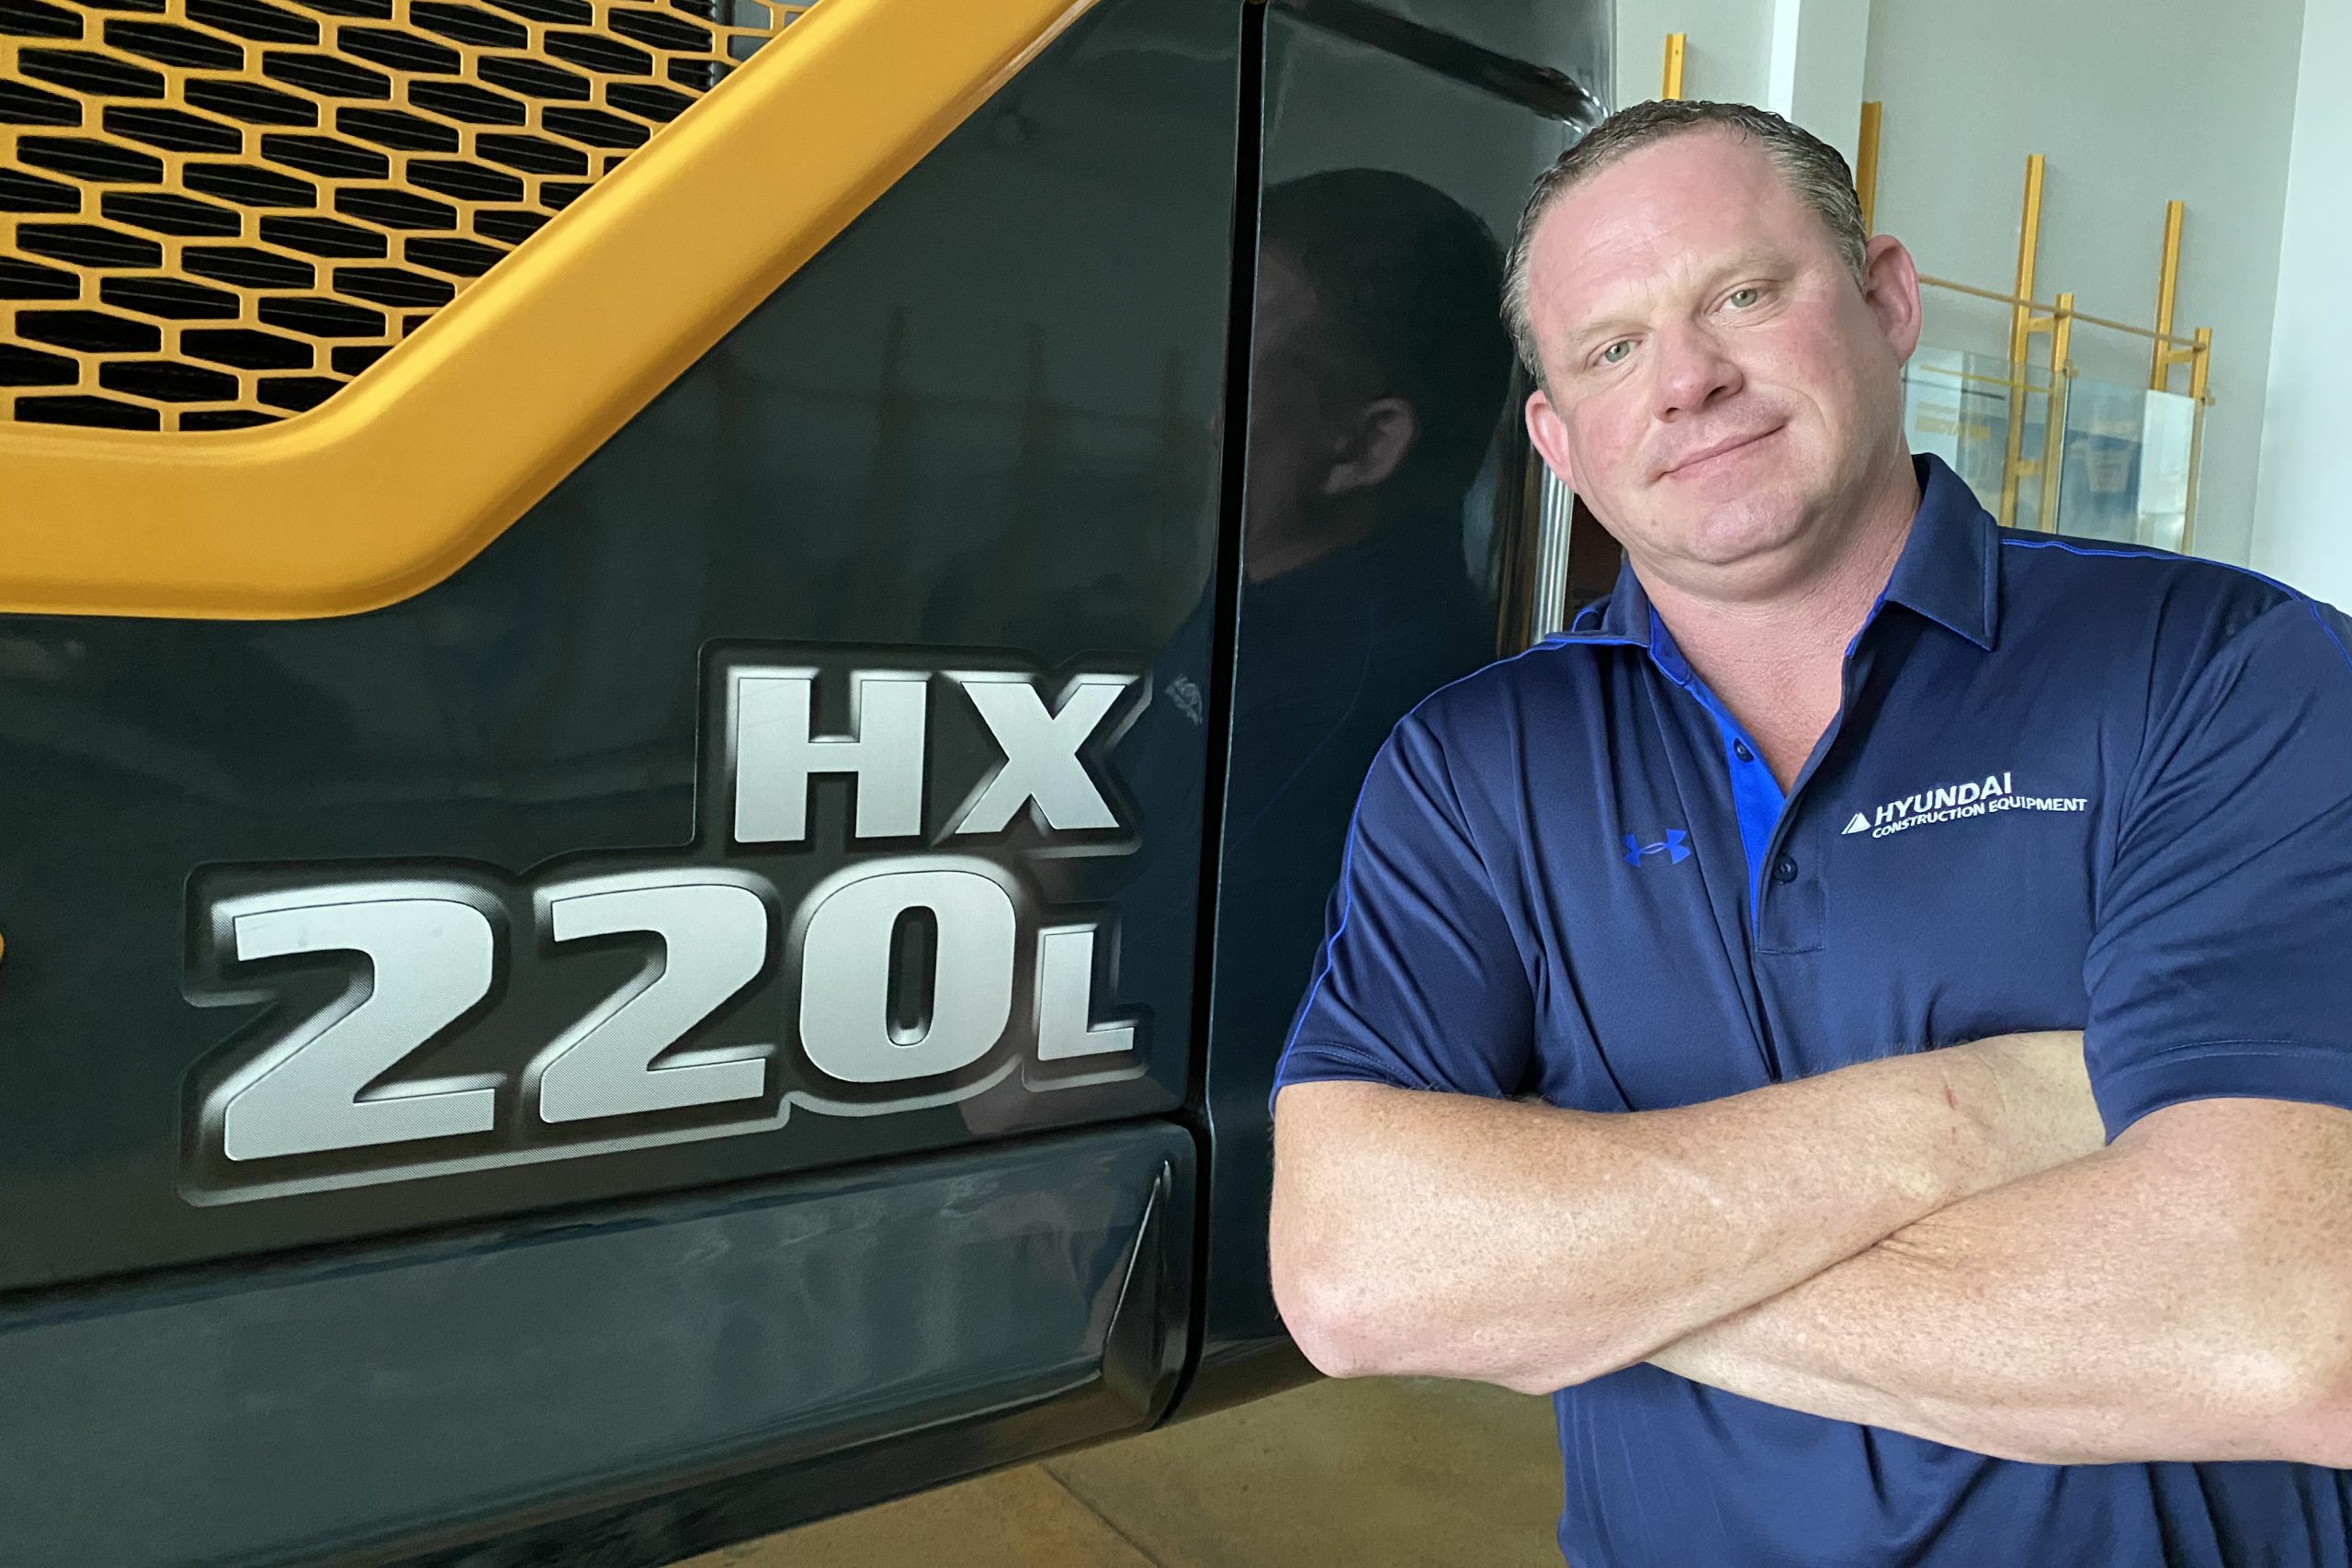 Hyundai Construction Equipment Americas Adds Michael Fuller as Senior Product Manager